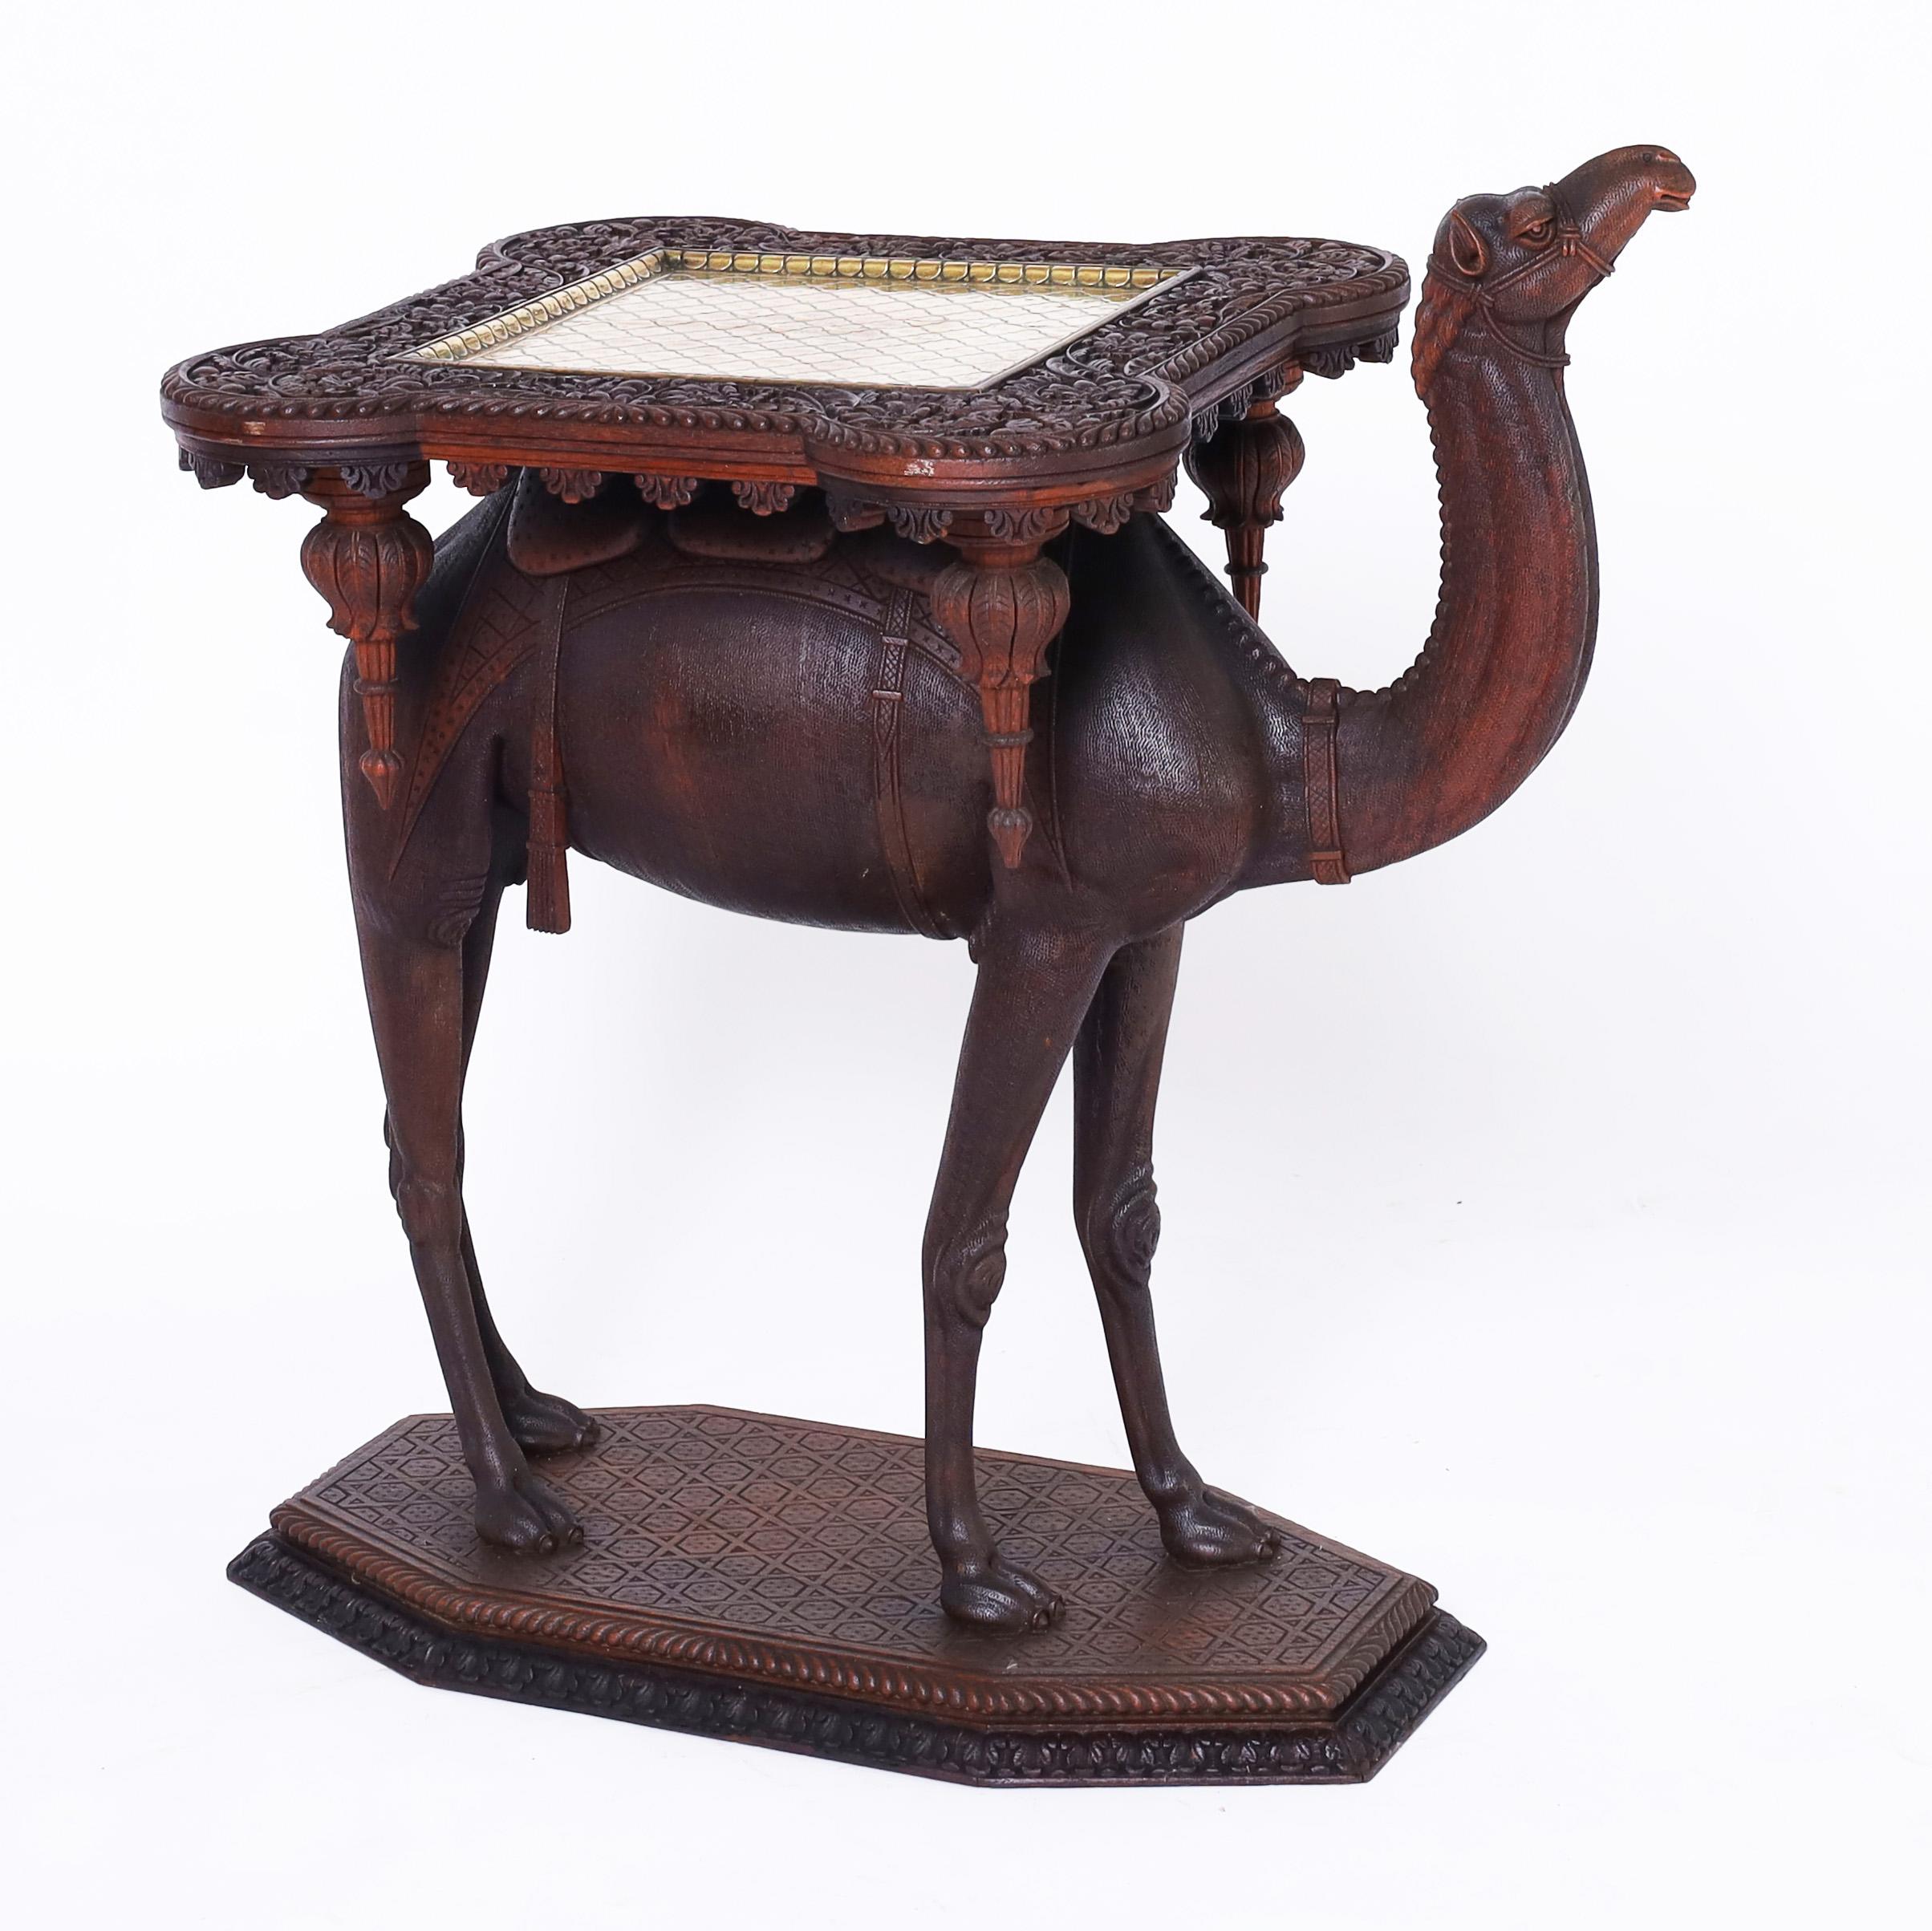 Enchanting 19th century Anglo Indian stand or table handcrafted in mahogany having an outlandish top with an inset brass tray and carved floral border on a carved camel with striking realism on a carved faux tile base. Best of the genre.